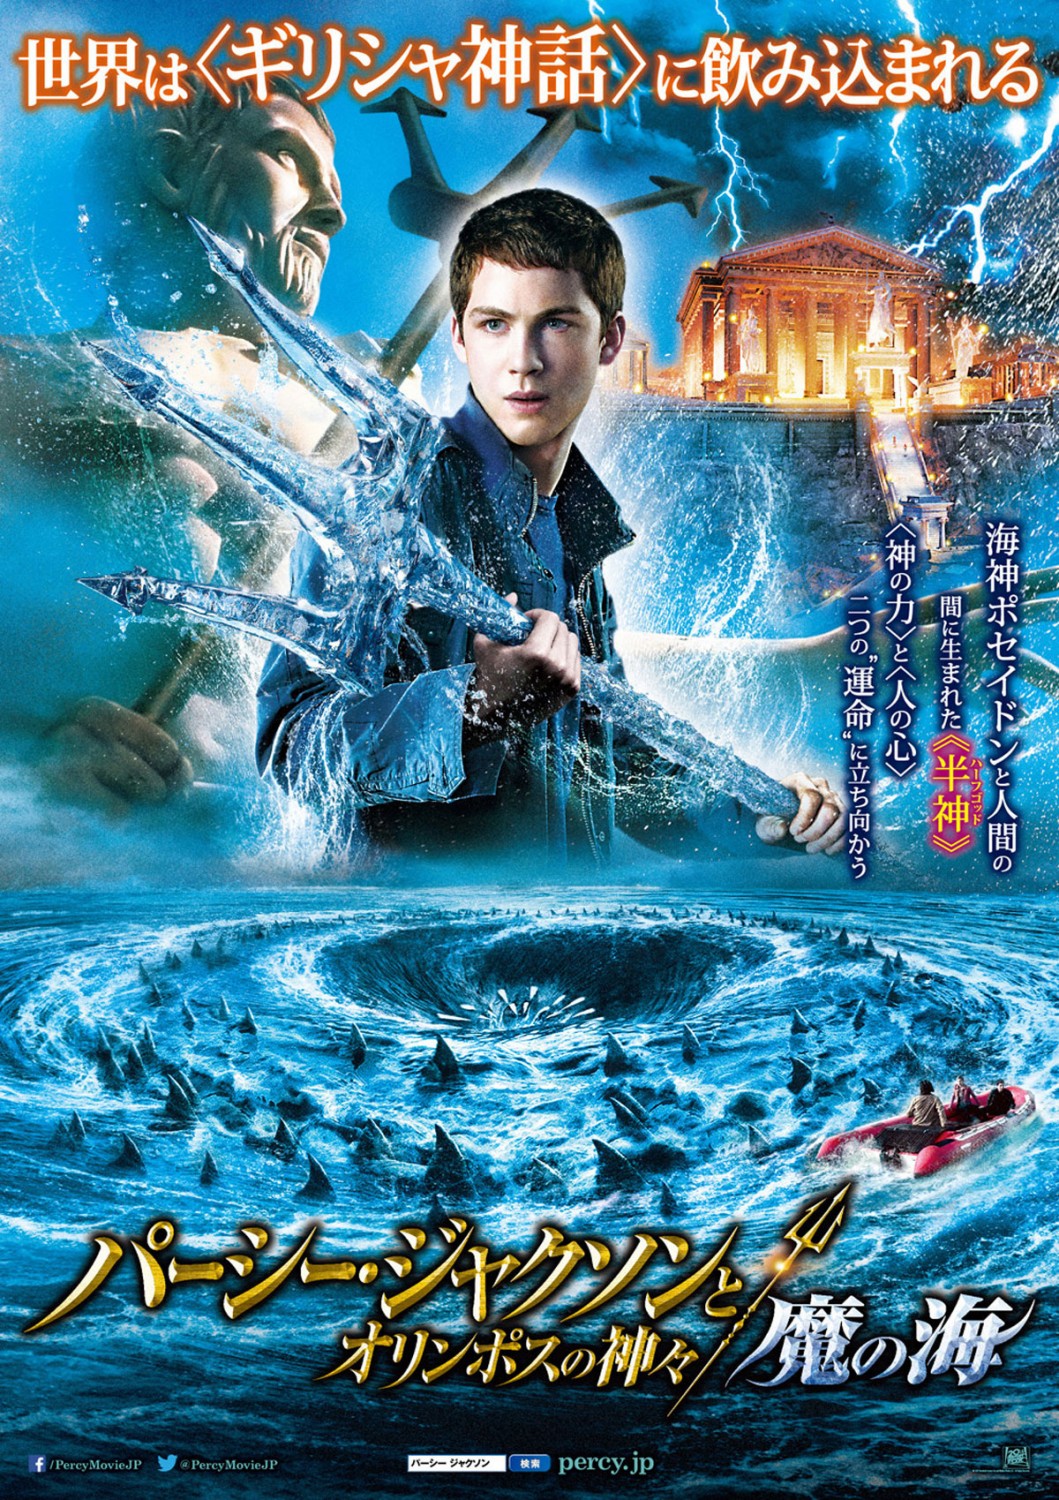 Extra Large Movie Poster Image for Percy Jackson: Sea of Monsters (#9 of 11)